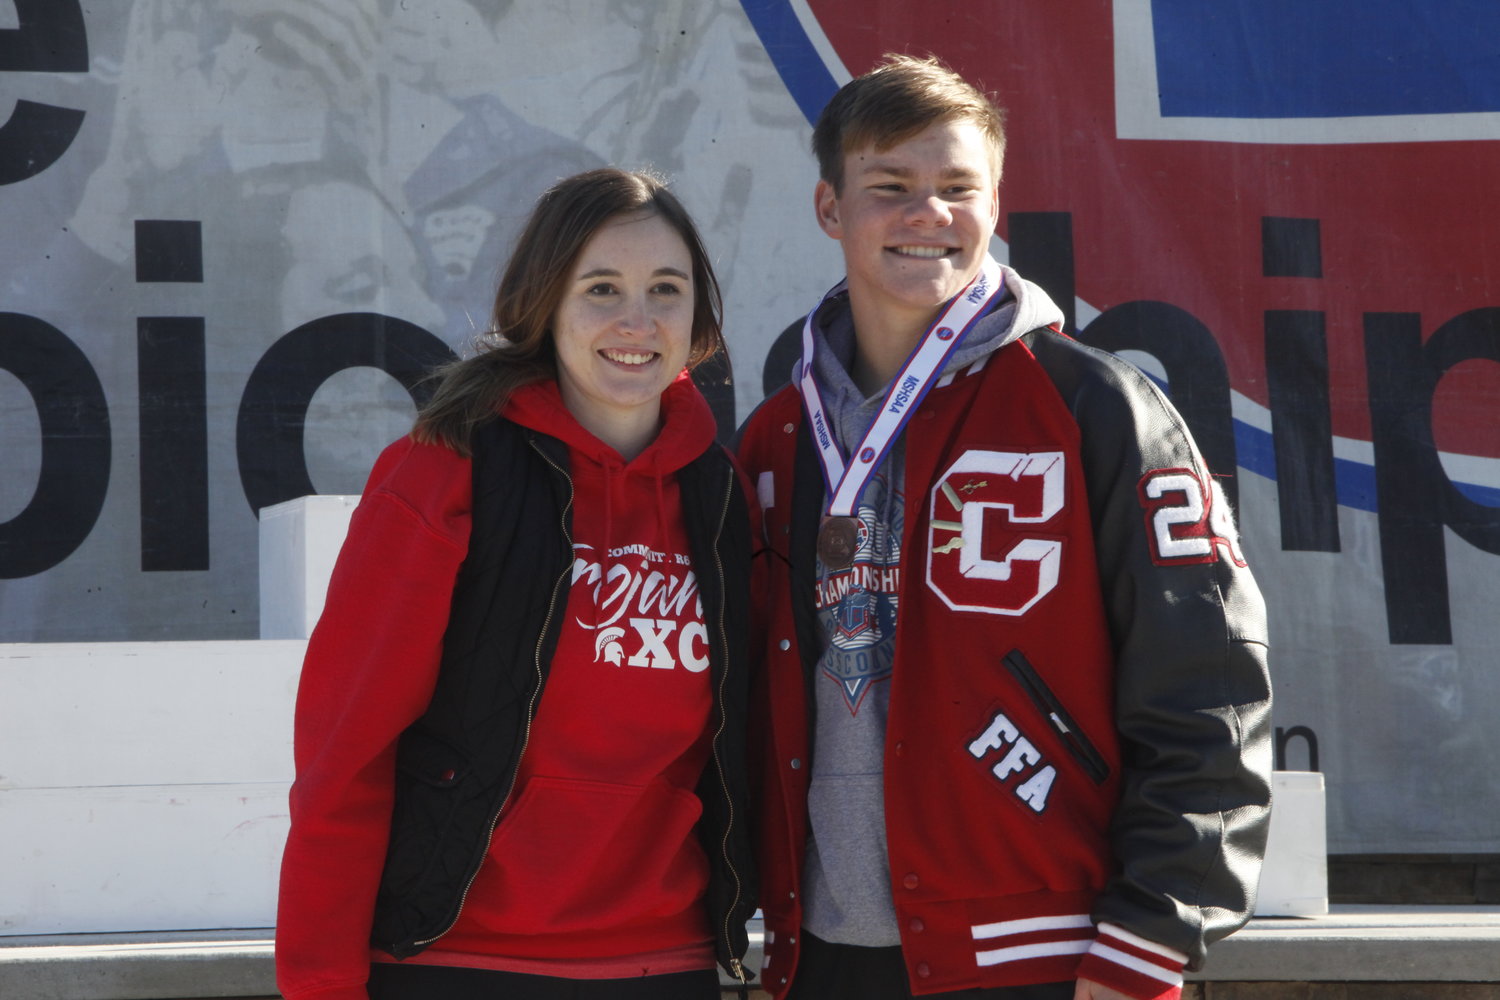 Community R-6 sophomore Dylan Hoyt poses with coach Josie Hess during the awards ceremony of the Class 1 state cross country meet on Nov. 6 in Columbia. Hoyt finished 17th with a 17:36. THEO TATE PHOTO